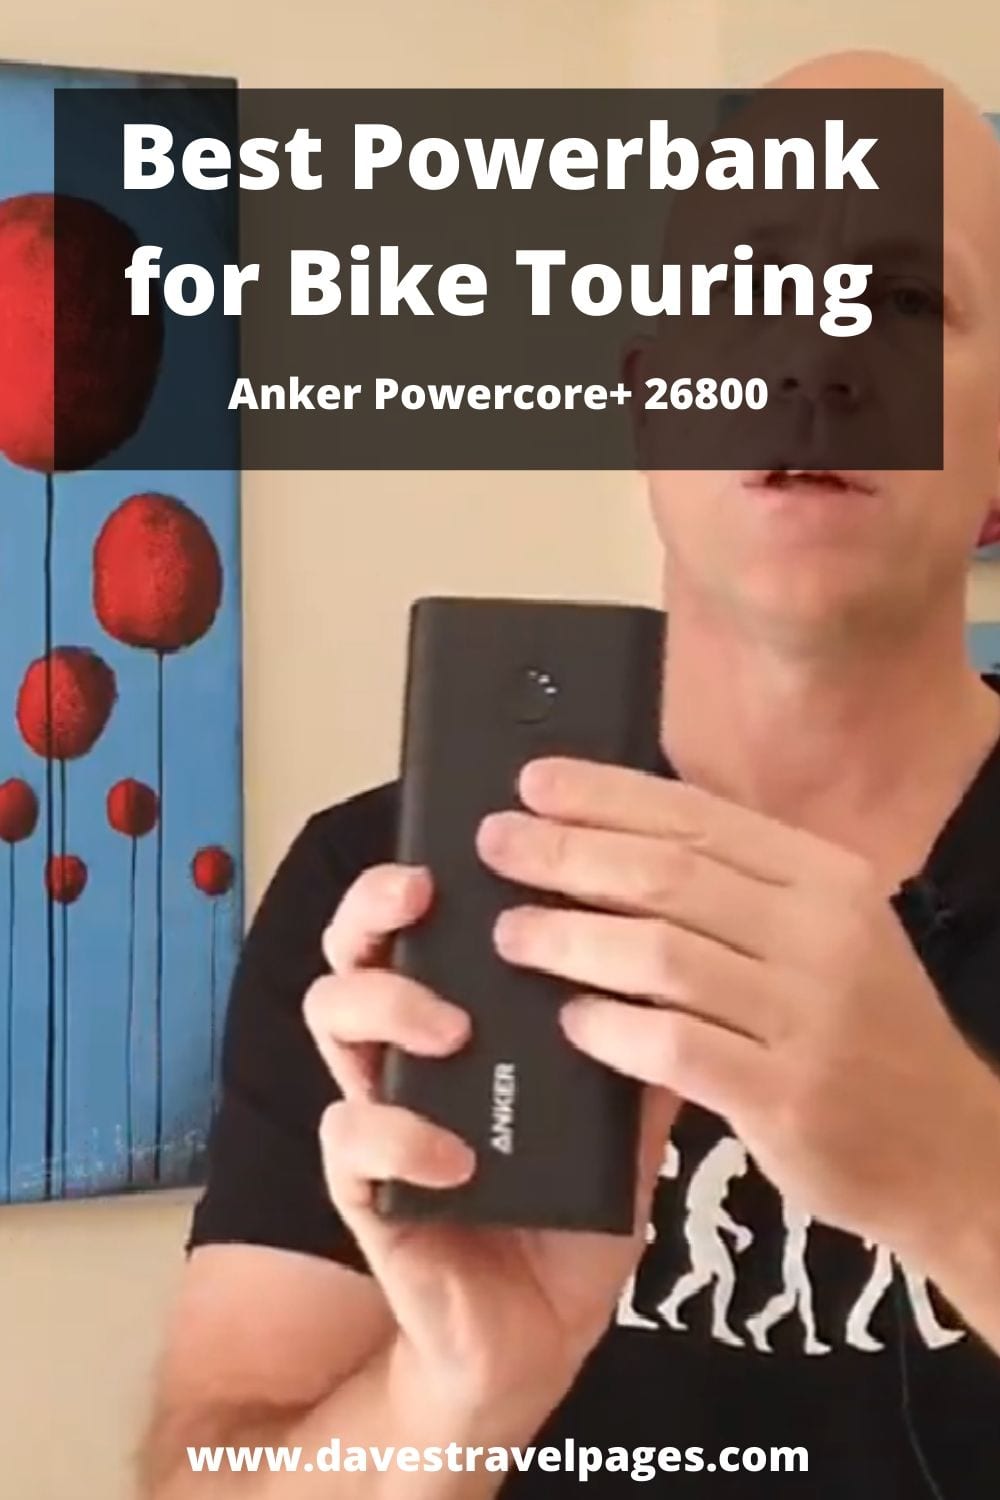 The best powerbank for bike touring reviewed